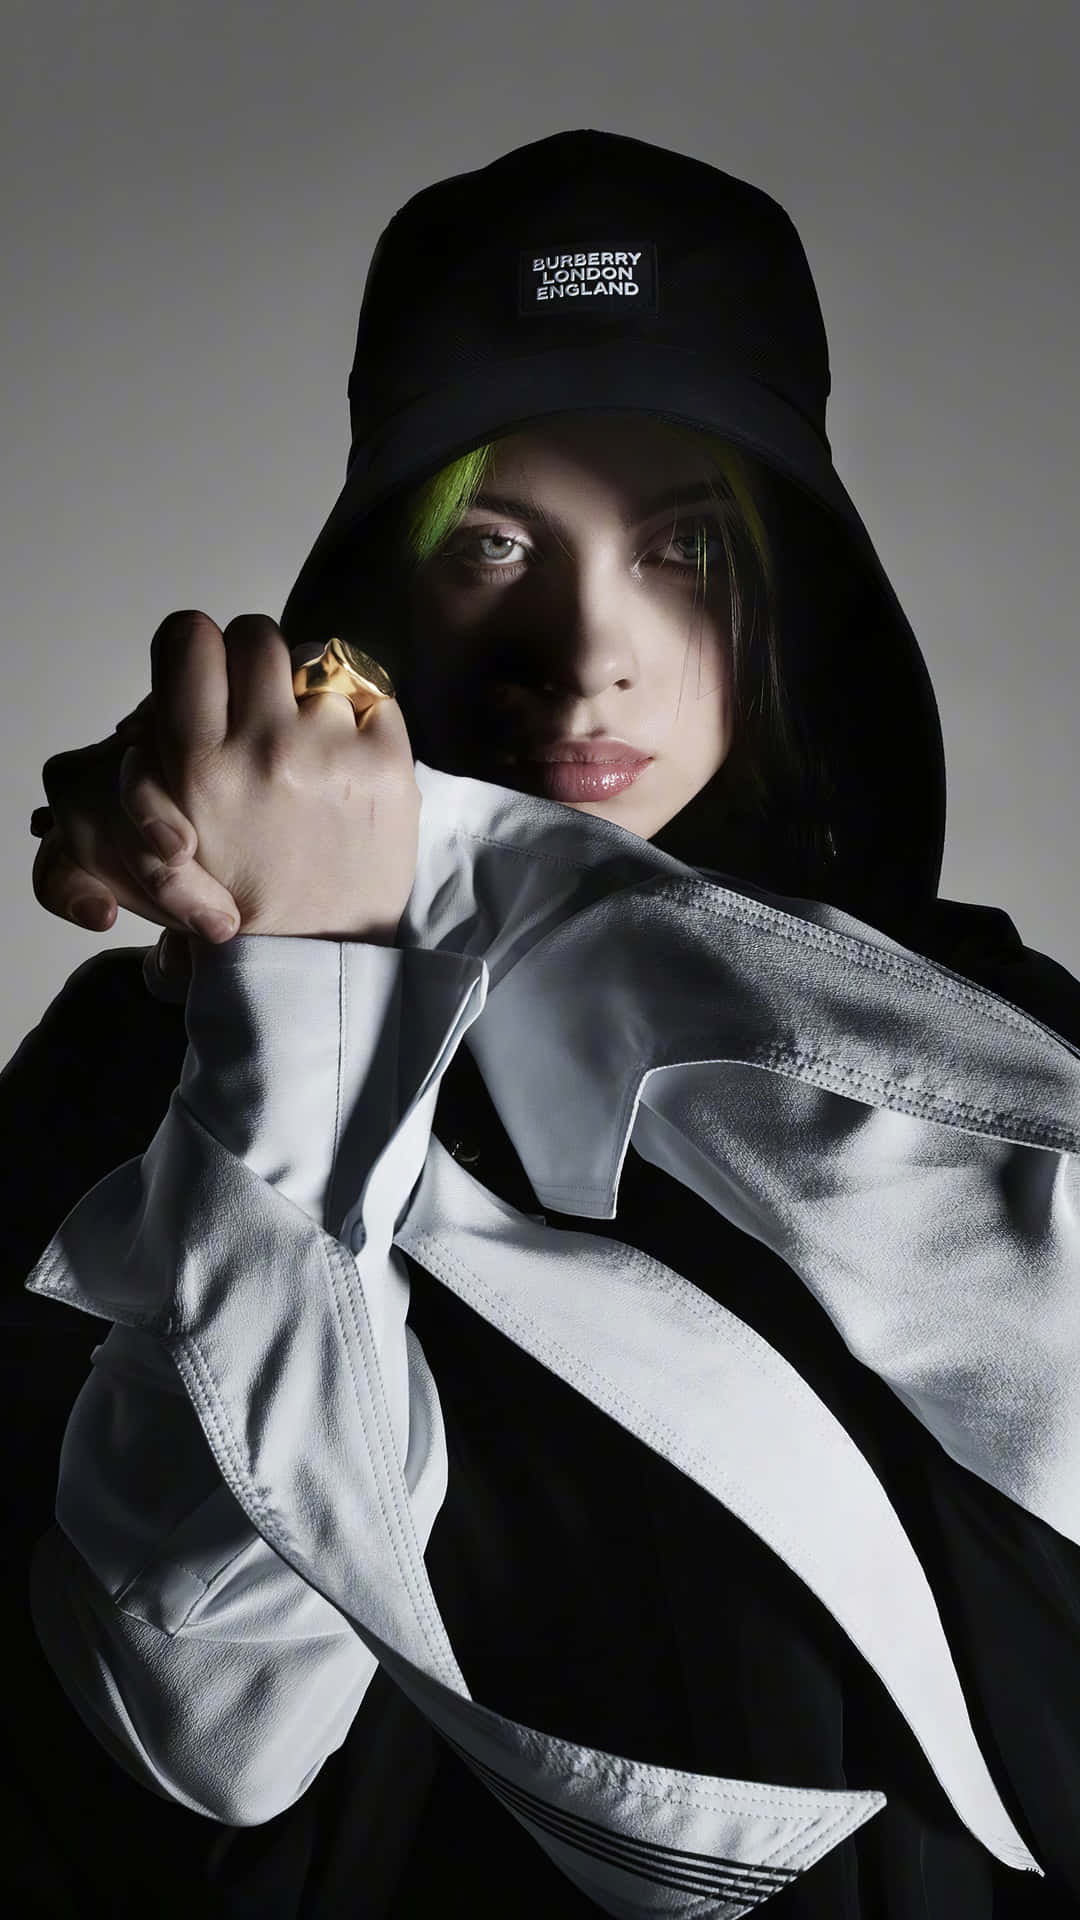 Singer/Songwriter Billie Eilish Smiles in Front of a Black and White Background